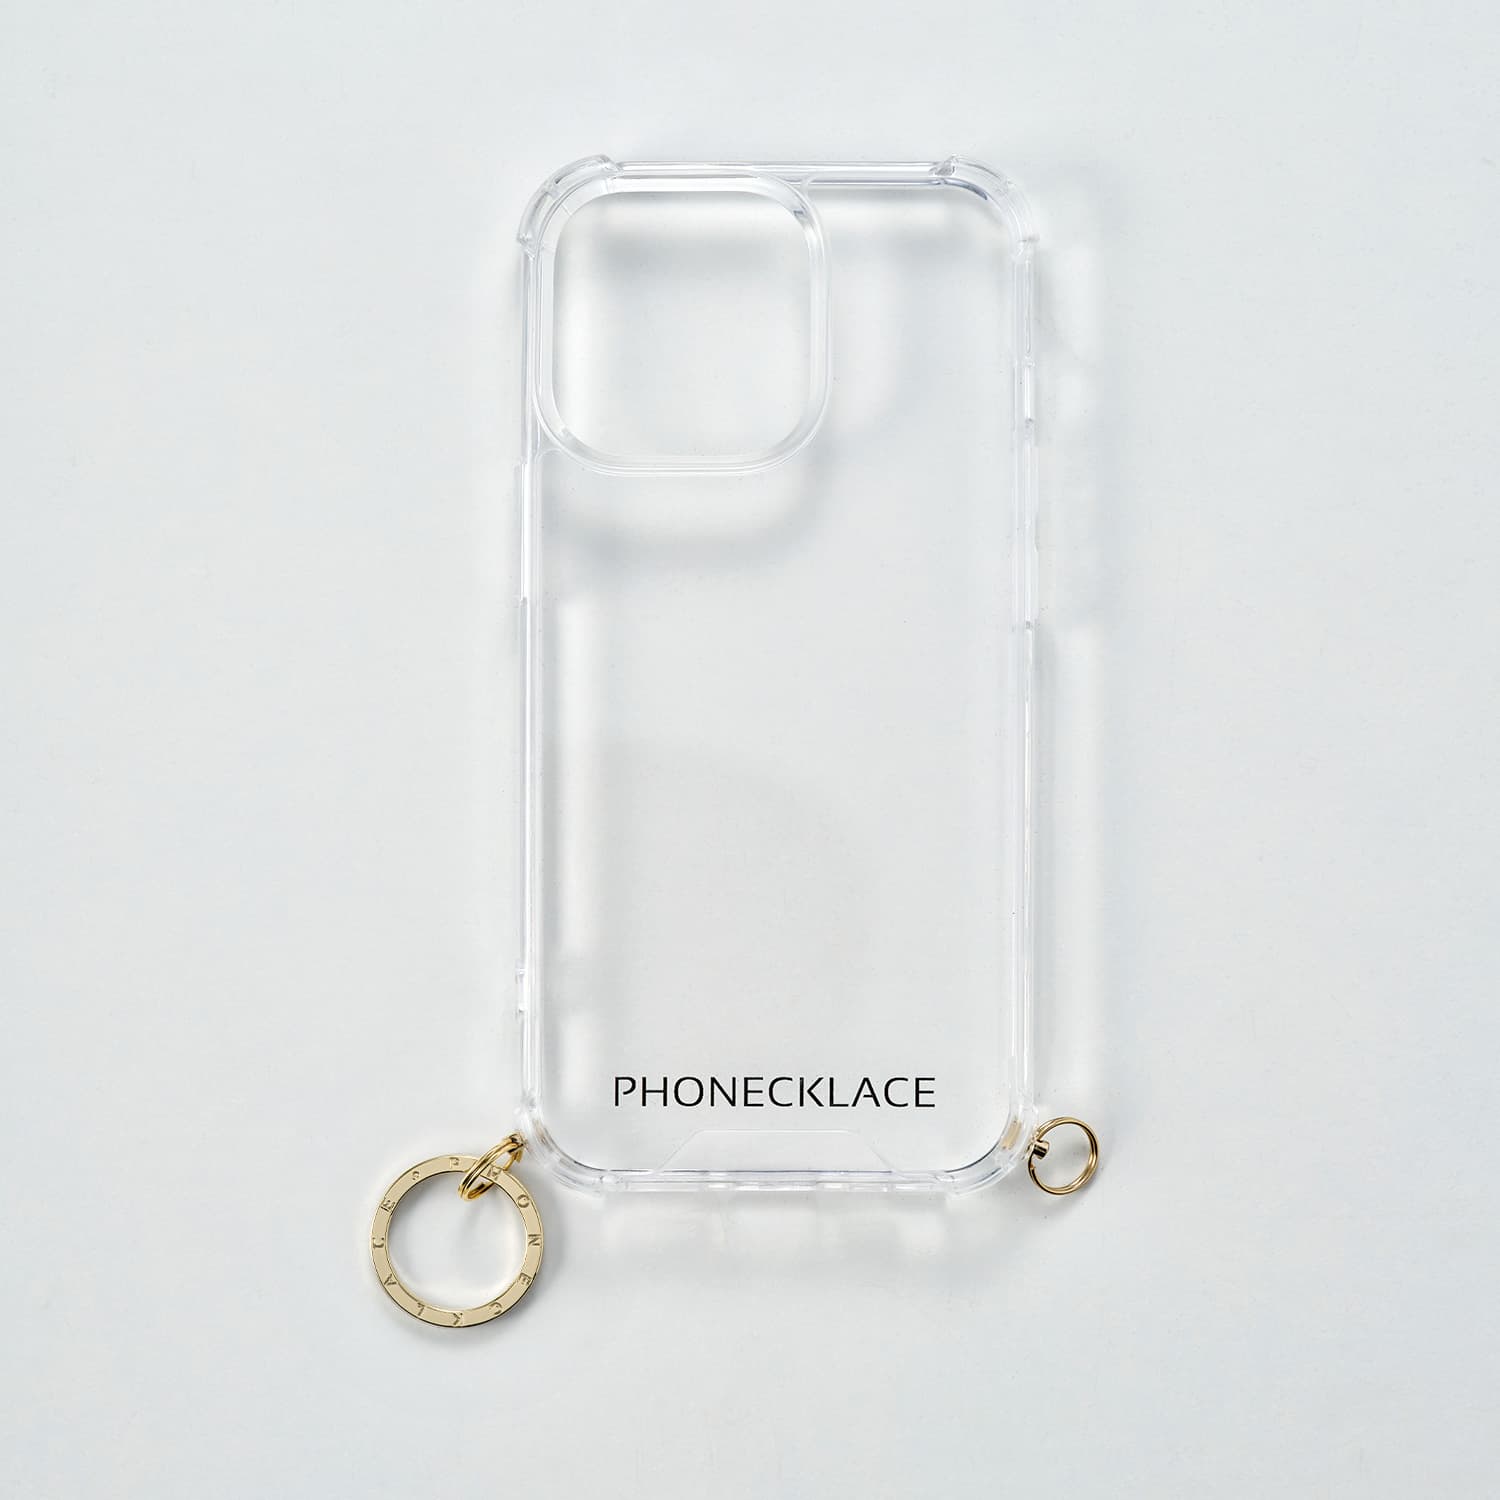 PHONECKACE  Shockproof  Bumper Phone Case  with  Inlaid metal for Safety